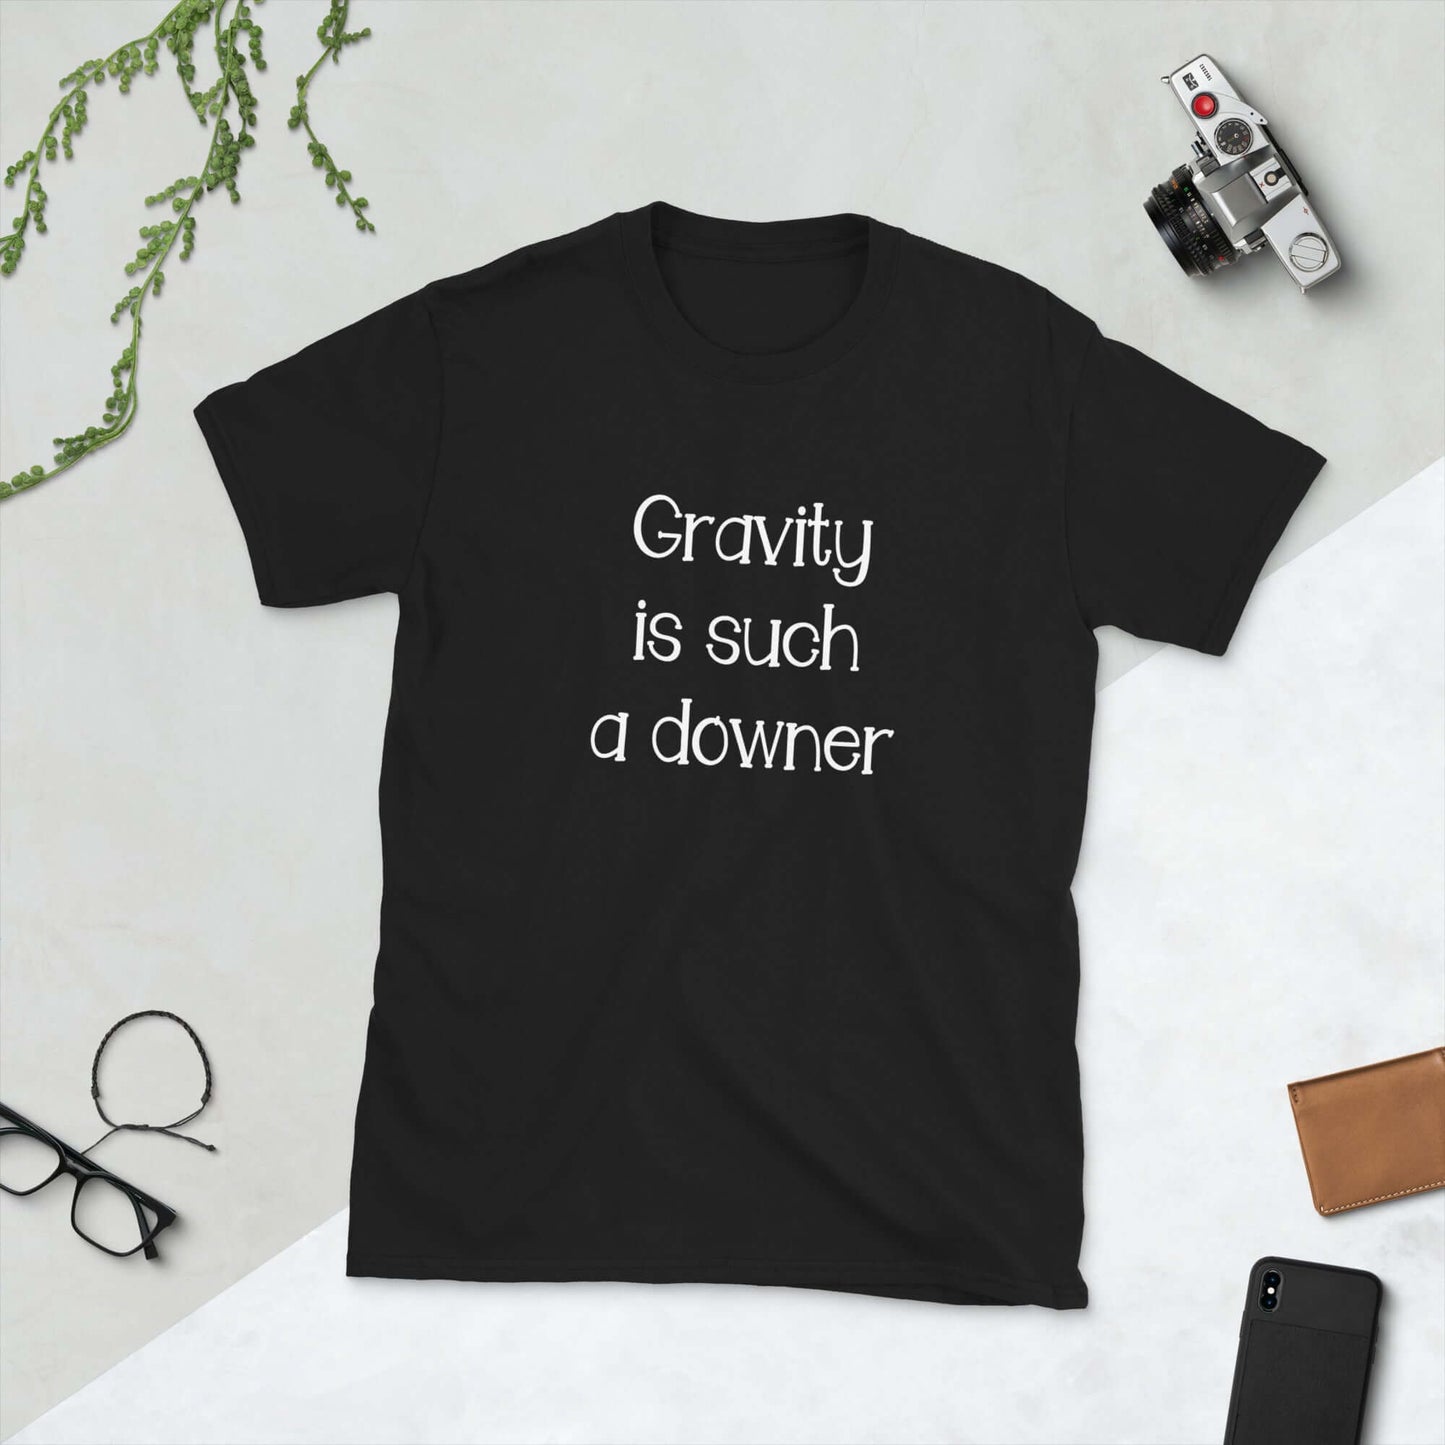 Gravity is such a downer t-shirt